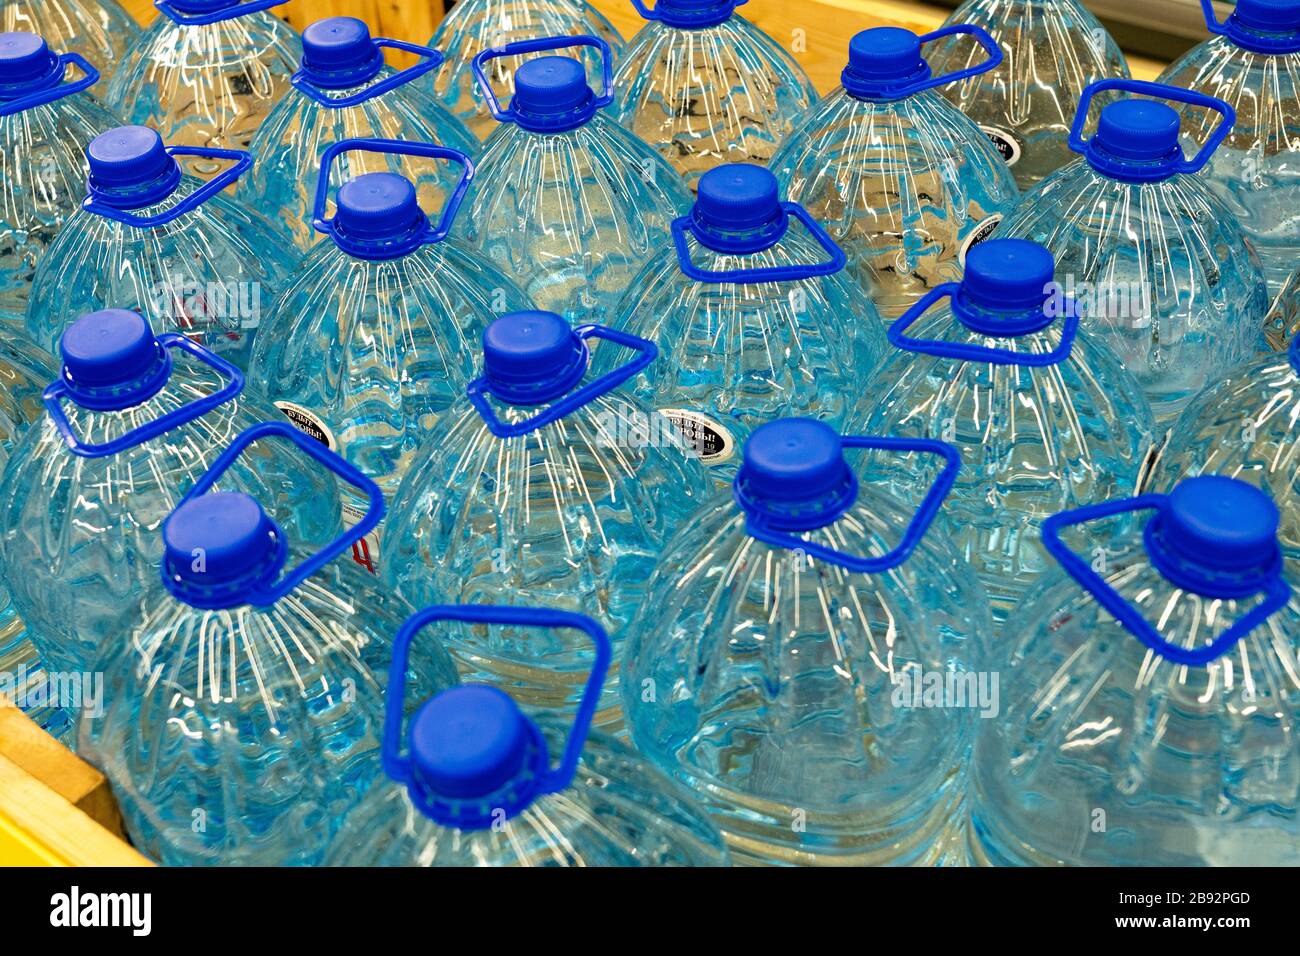 Drinking water bottles in a store. Batch of plastic bottles of water. Stock Photo